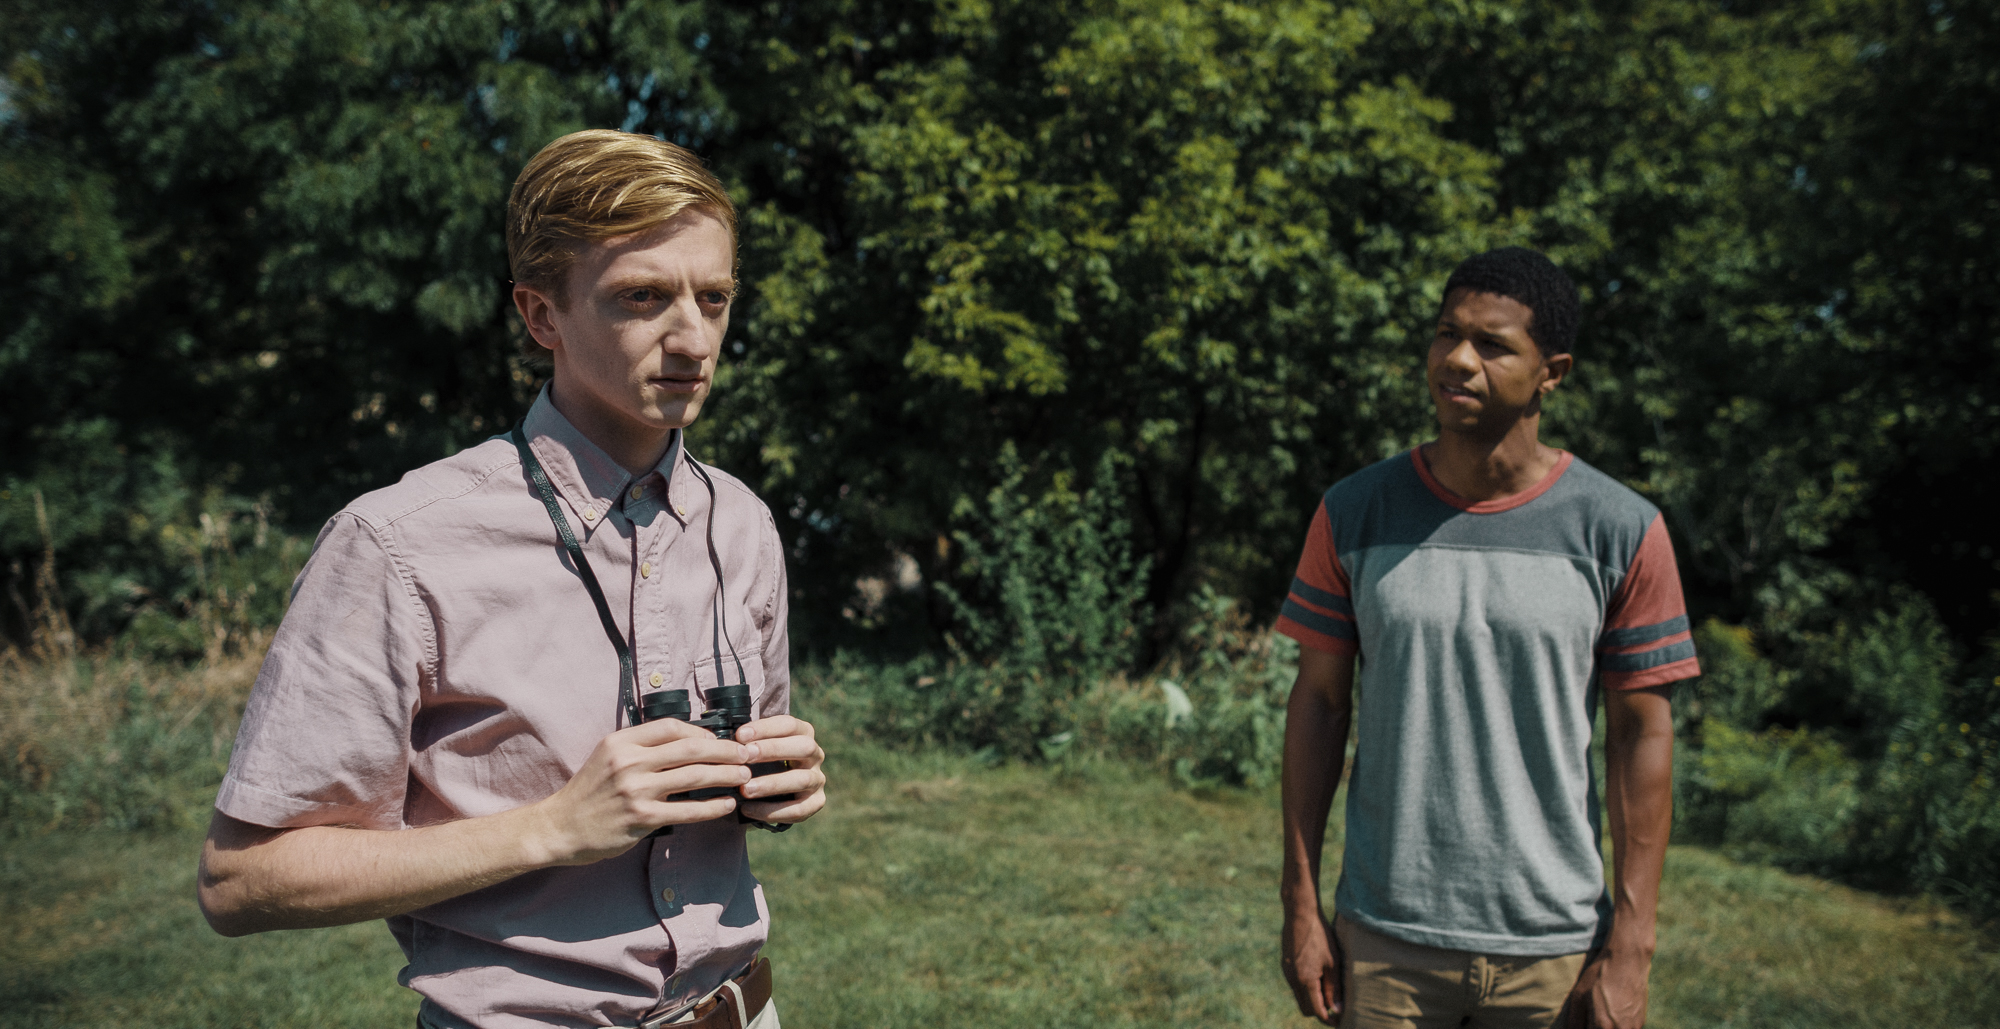 Actors in the short drama film 'Love' shot in Chicago by Director of Photography Jason Kraynek